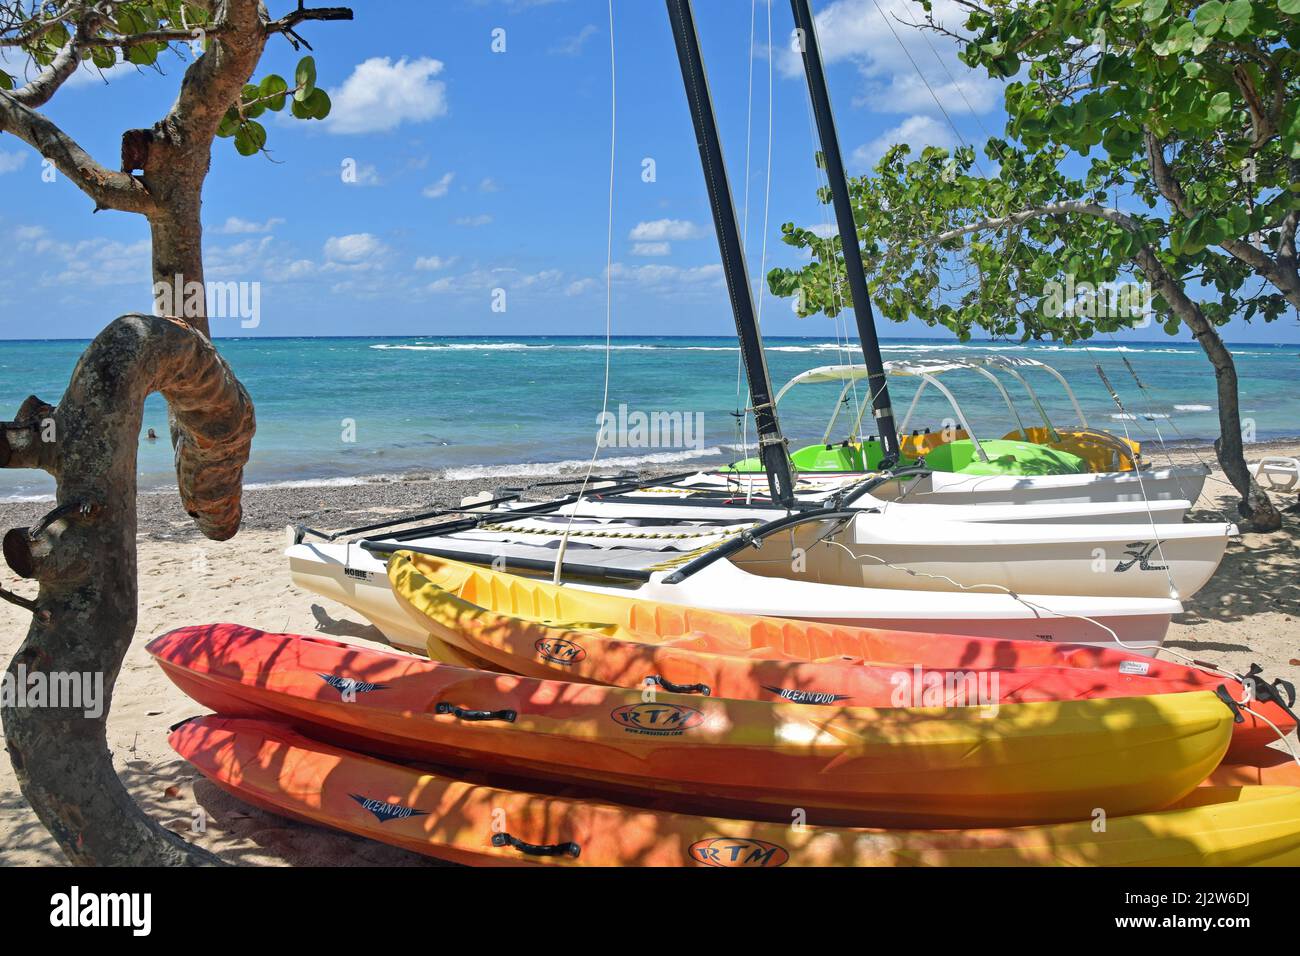 Colorful boats on a Cuban beach Stock Photo